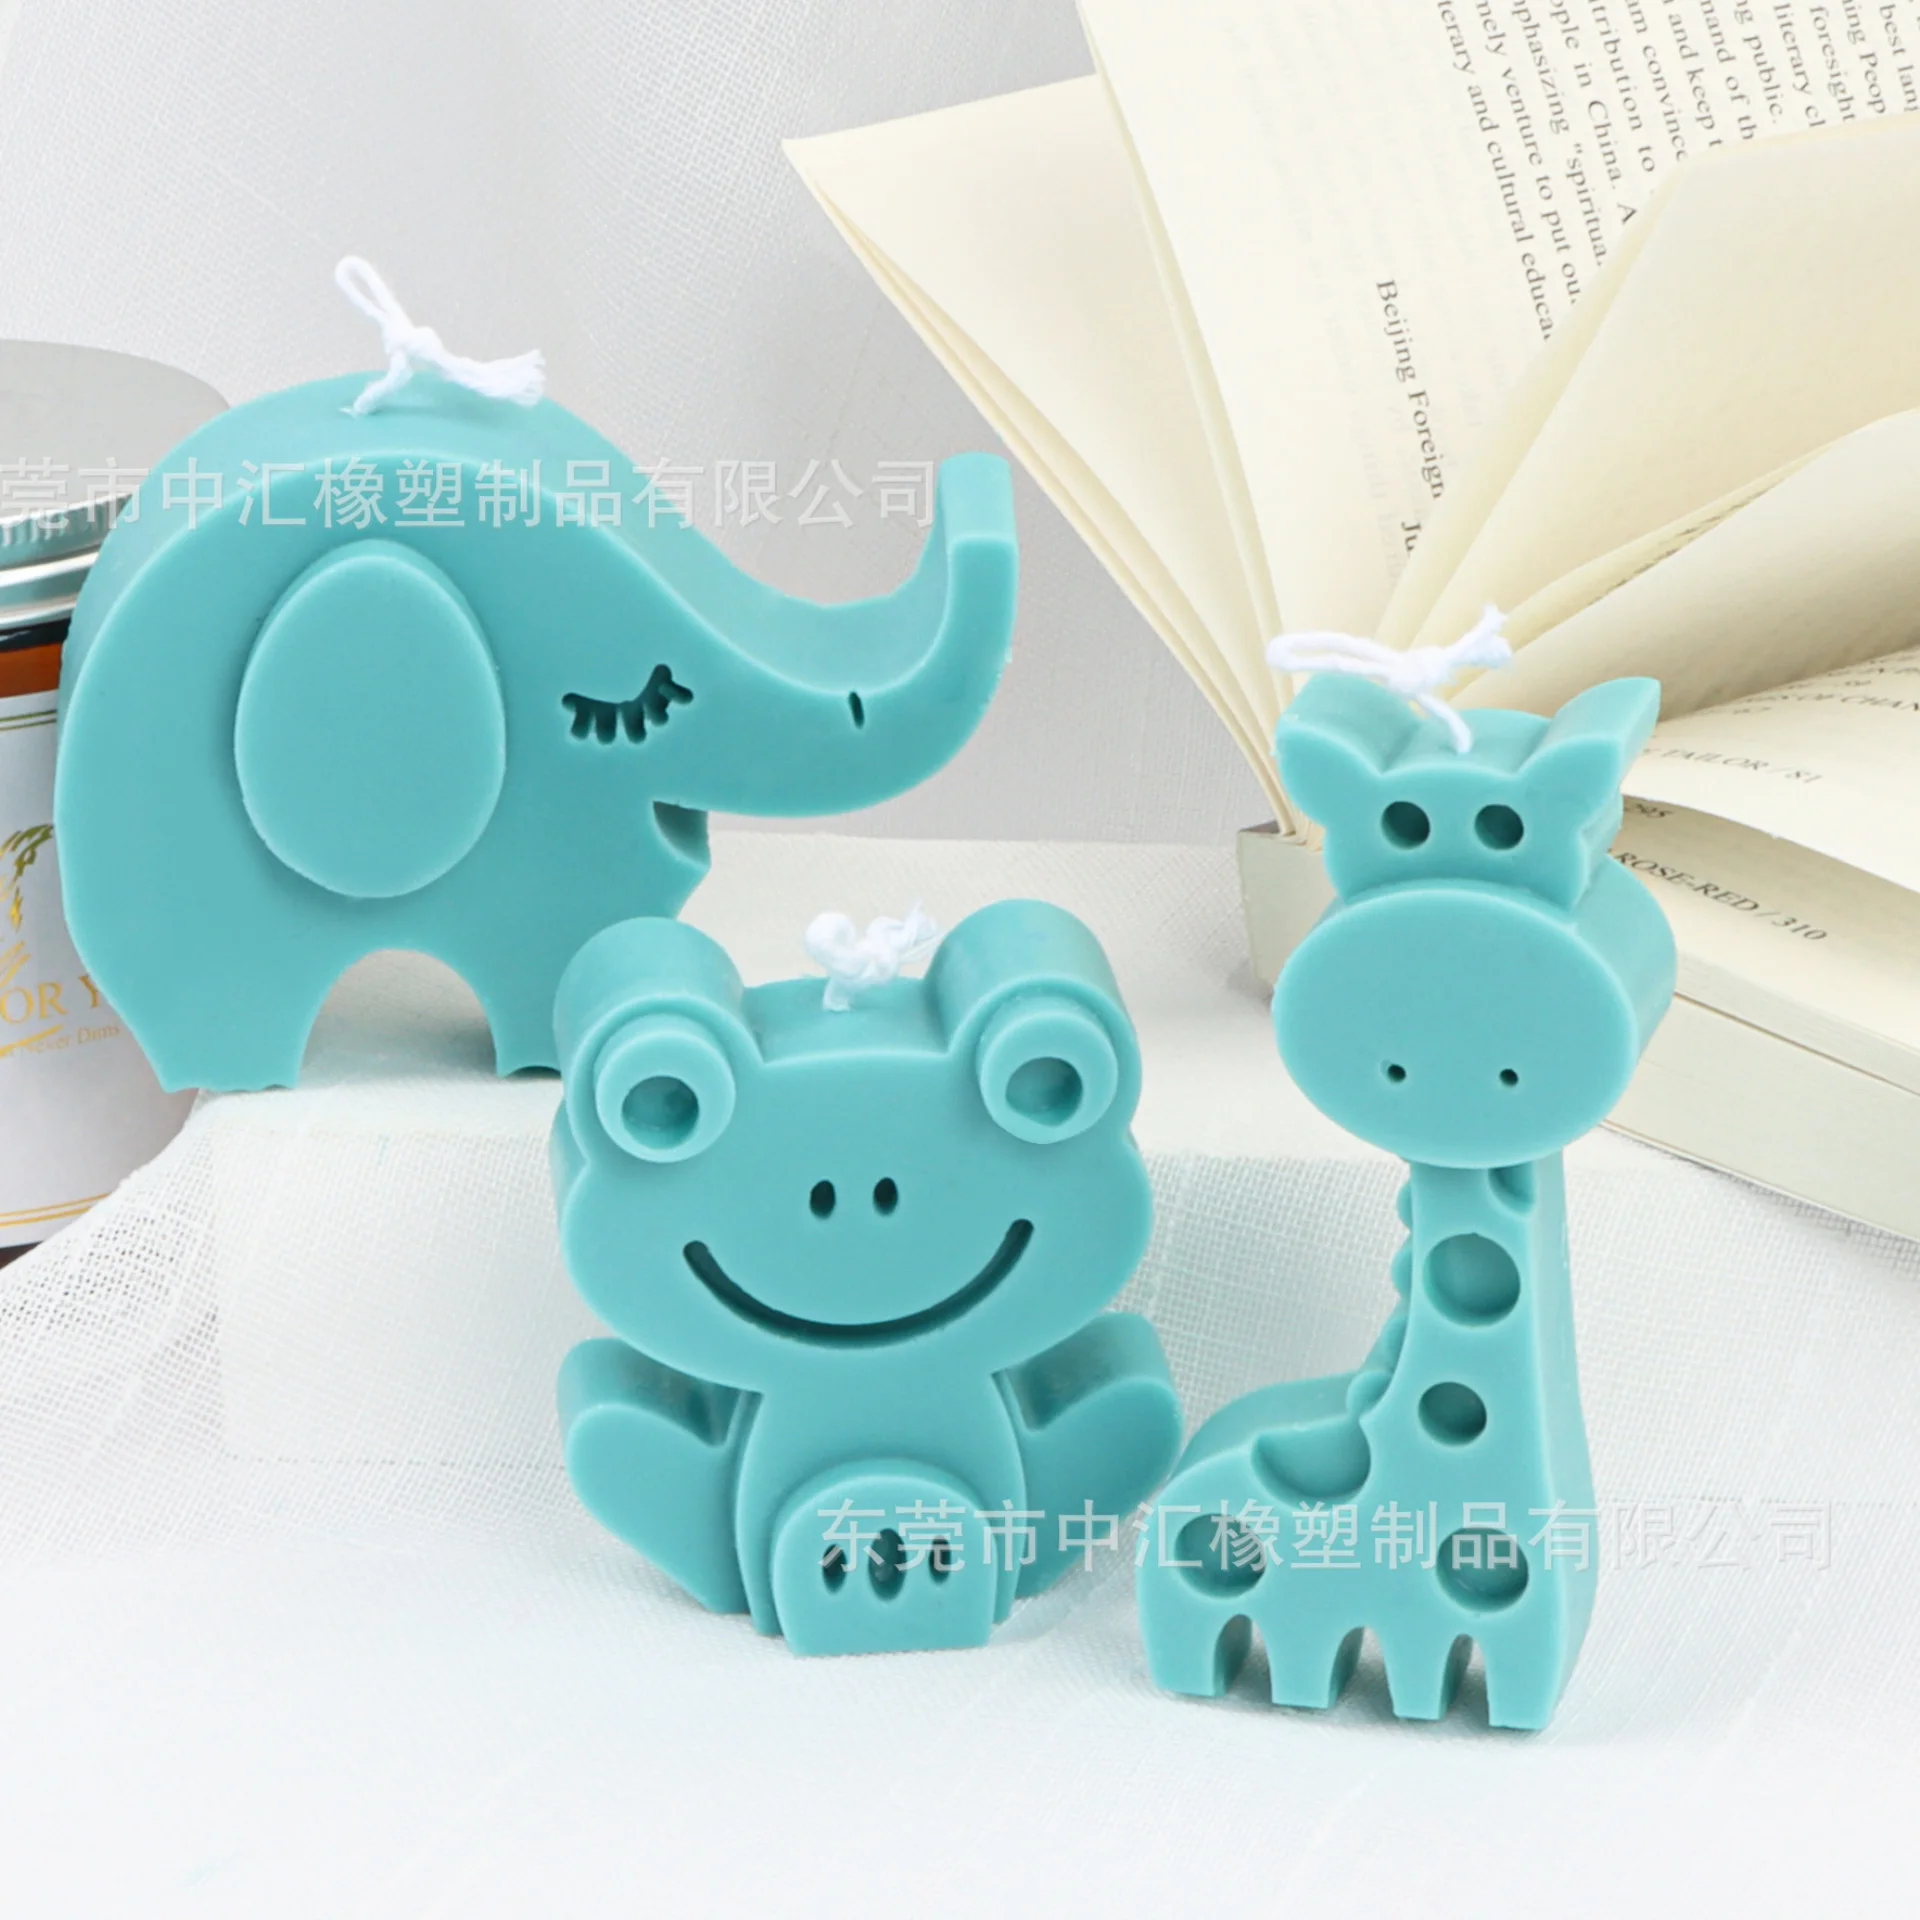 New Animal Candle Mold Giraffe Dinosaur Shape Scented Candle Silicone Mold Handmade Candle Decoration Soap Mold Craft Gift